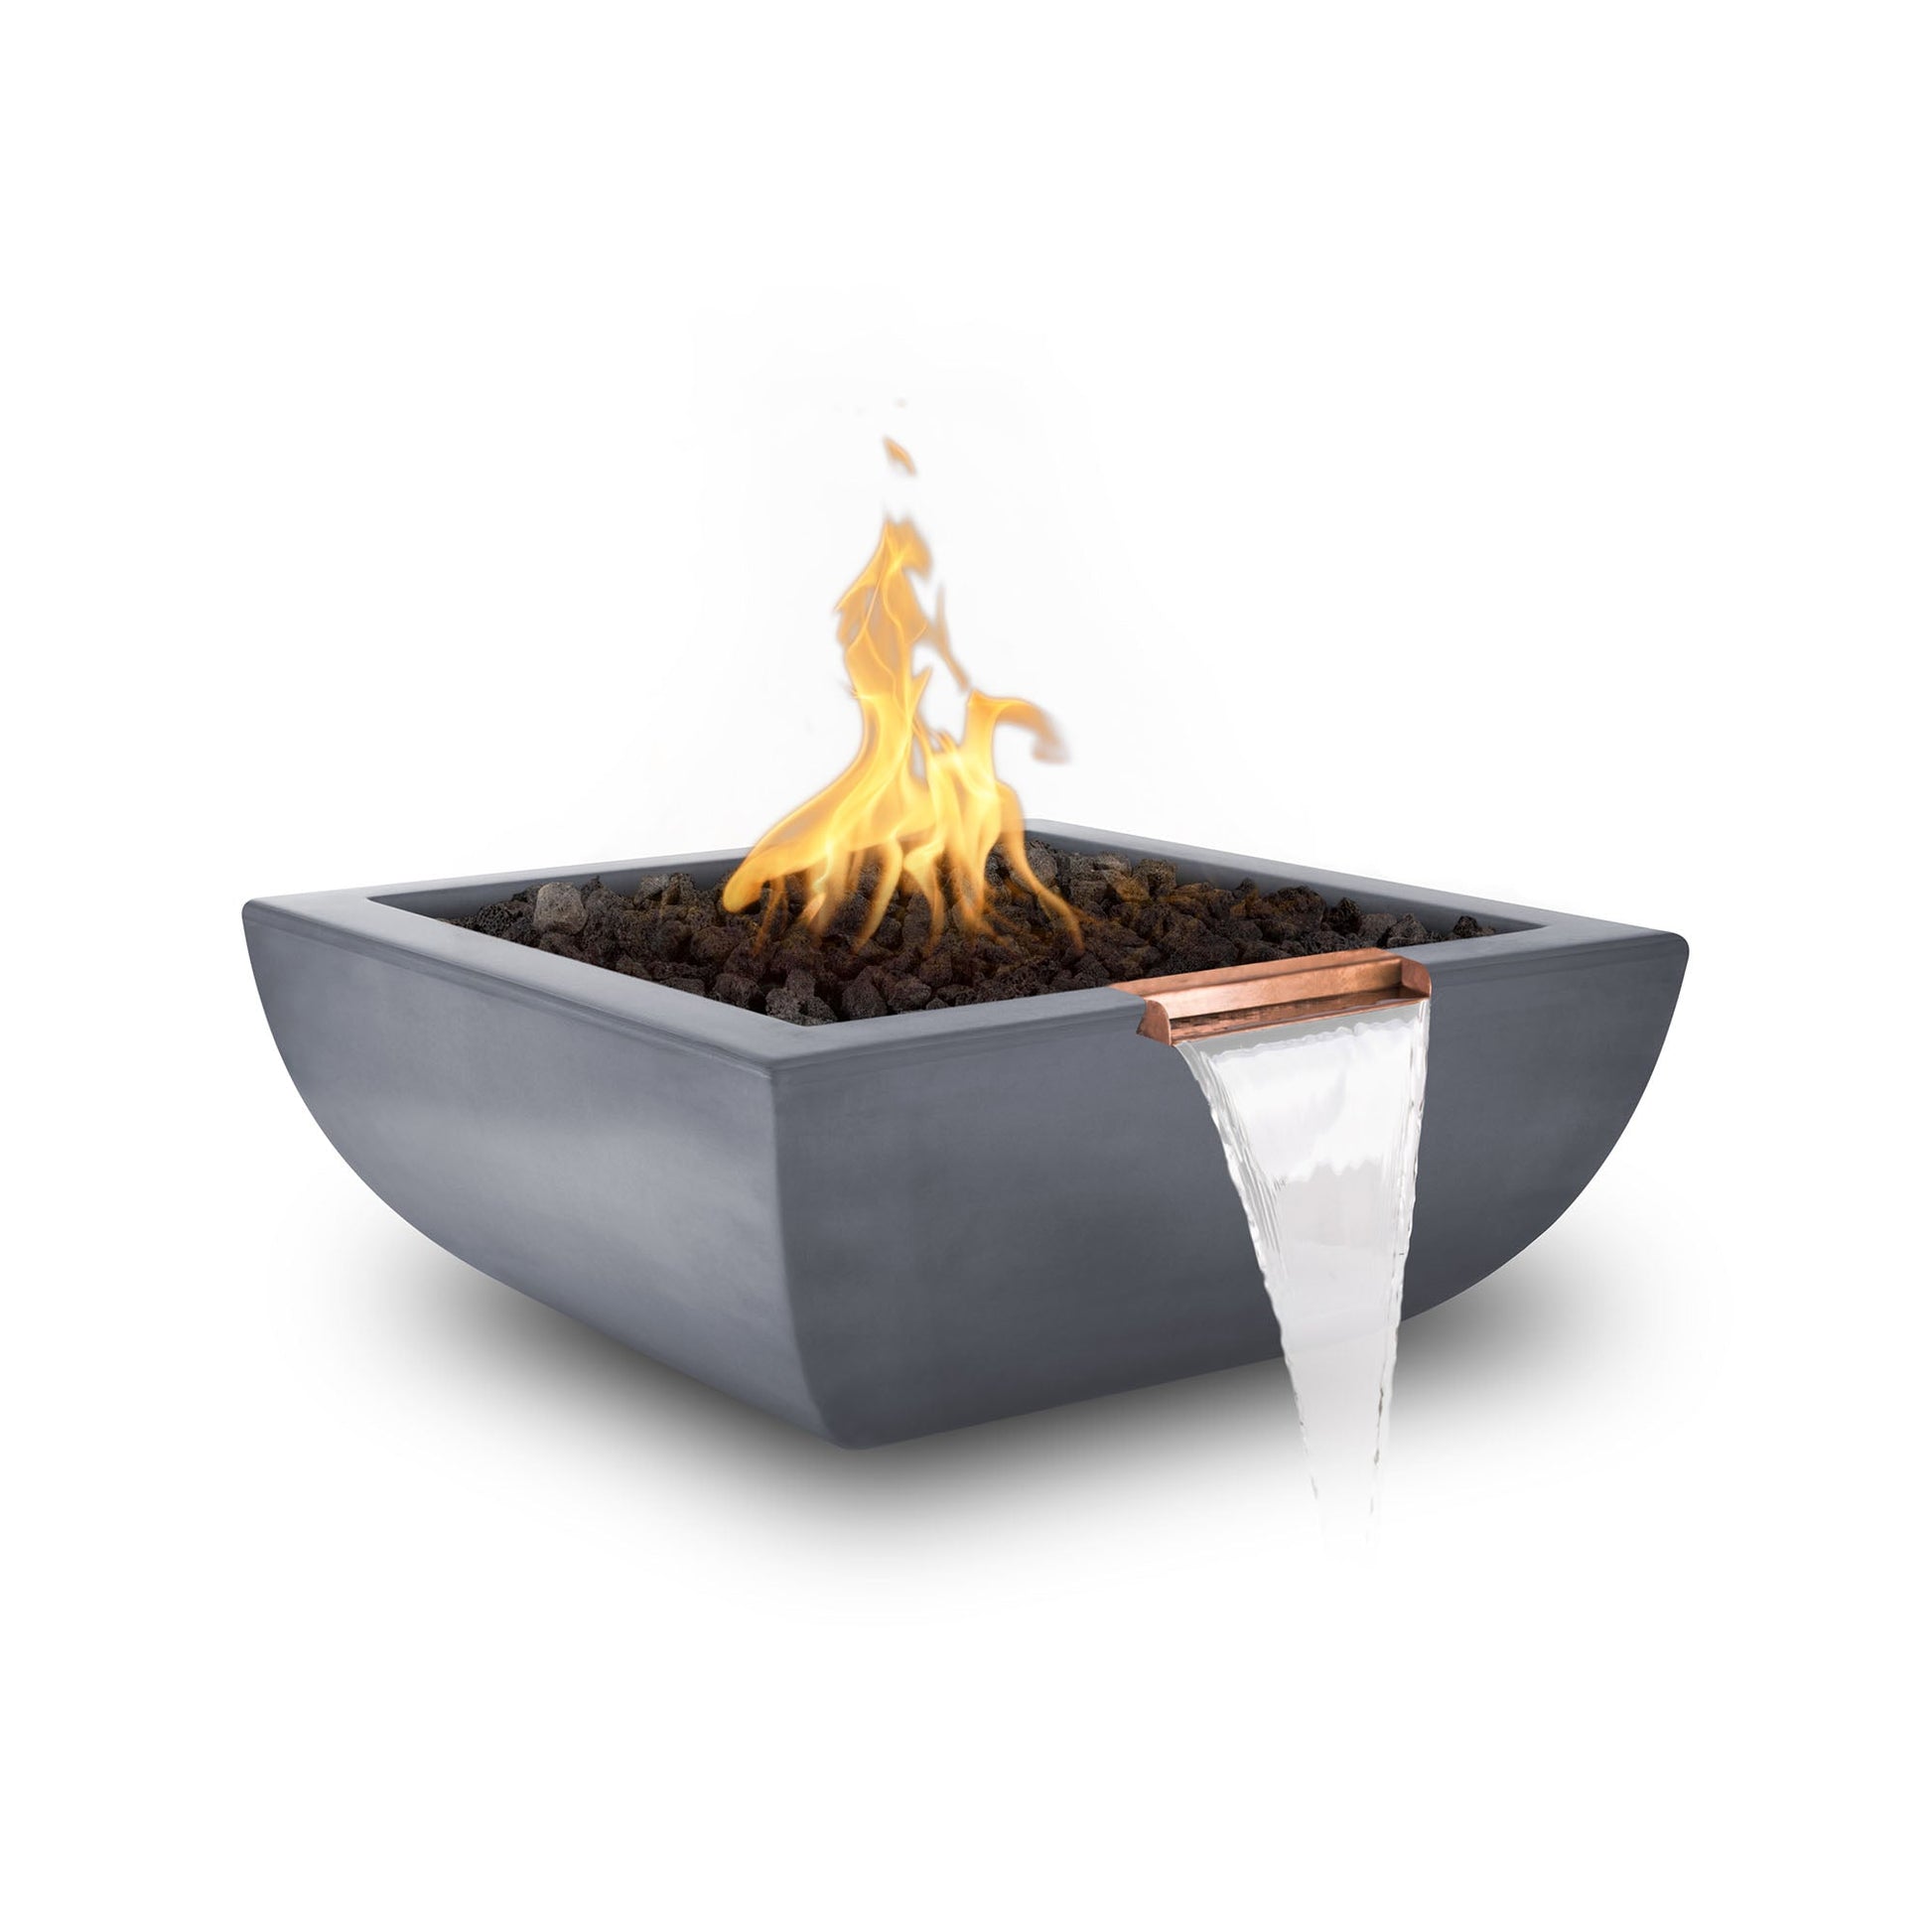 The Outdoor Plus Square Avalon 30" Gray GFRC Concrete Liquid Propane Fire & Water Bowl with Match Lit with Flame Sense Ignition